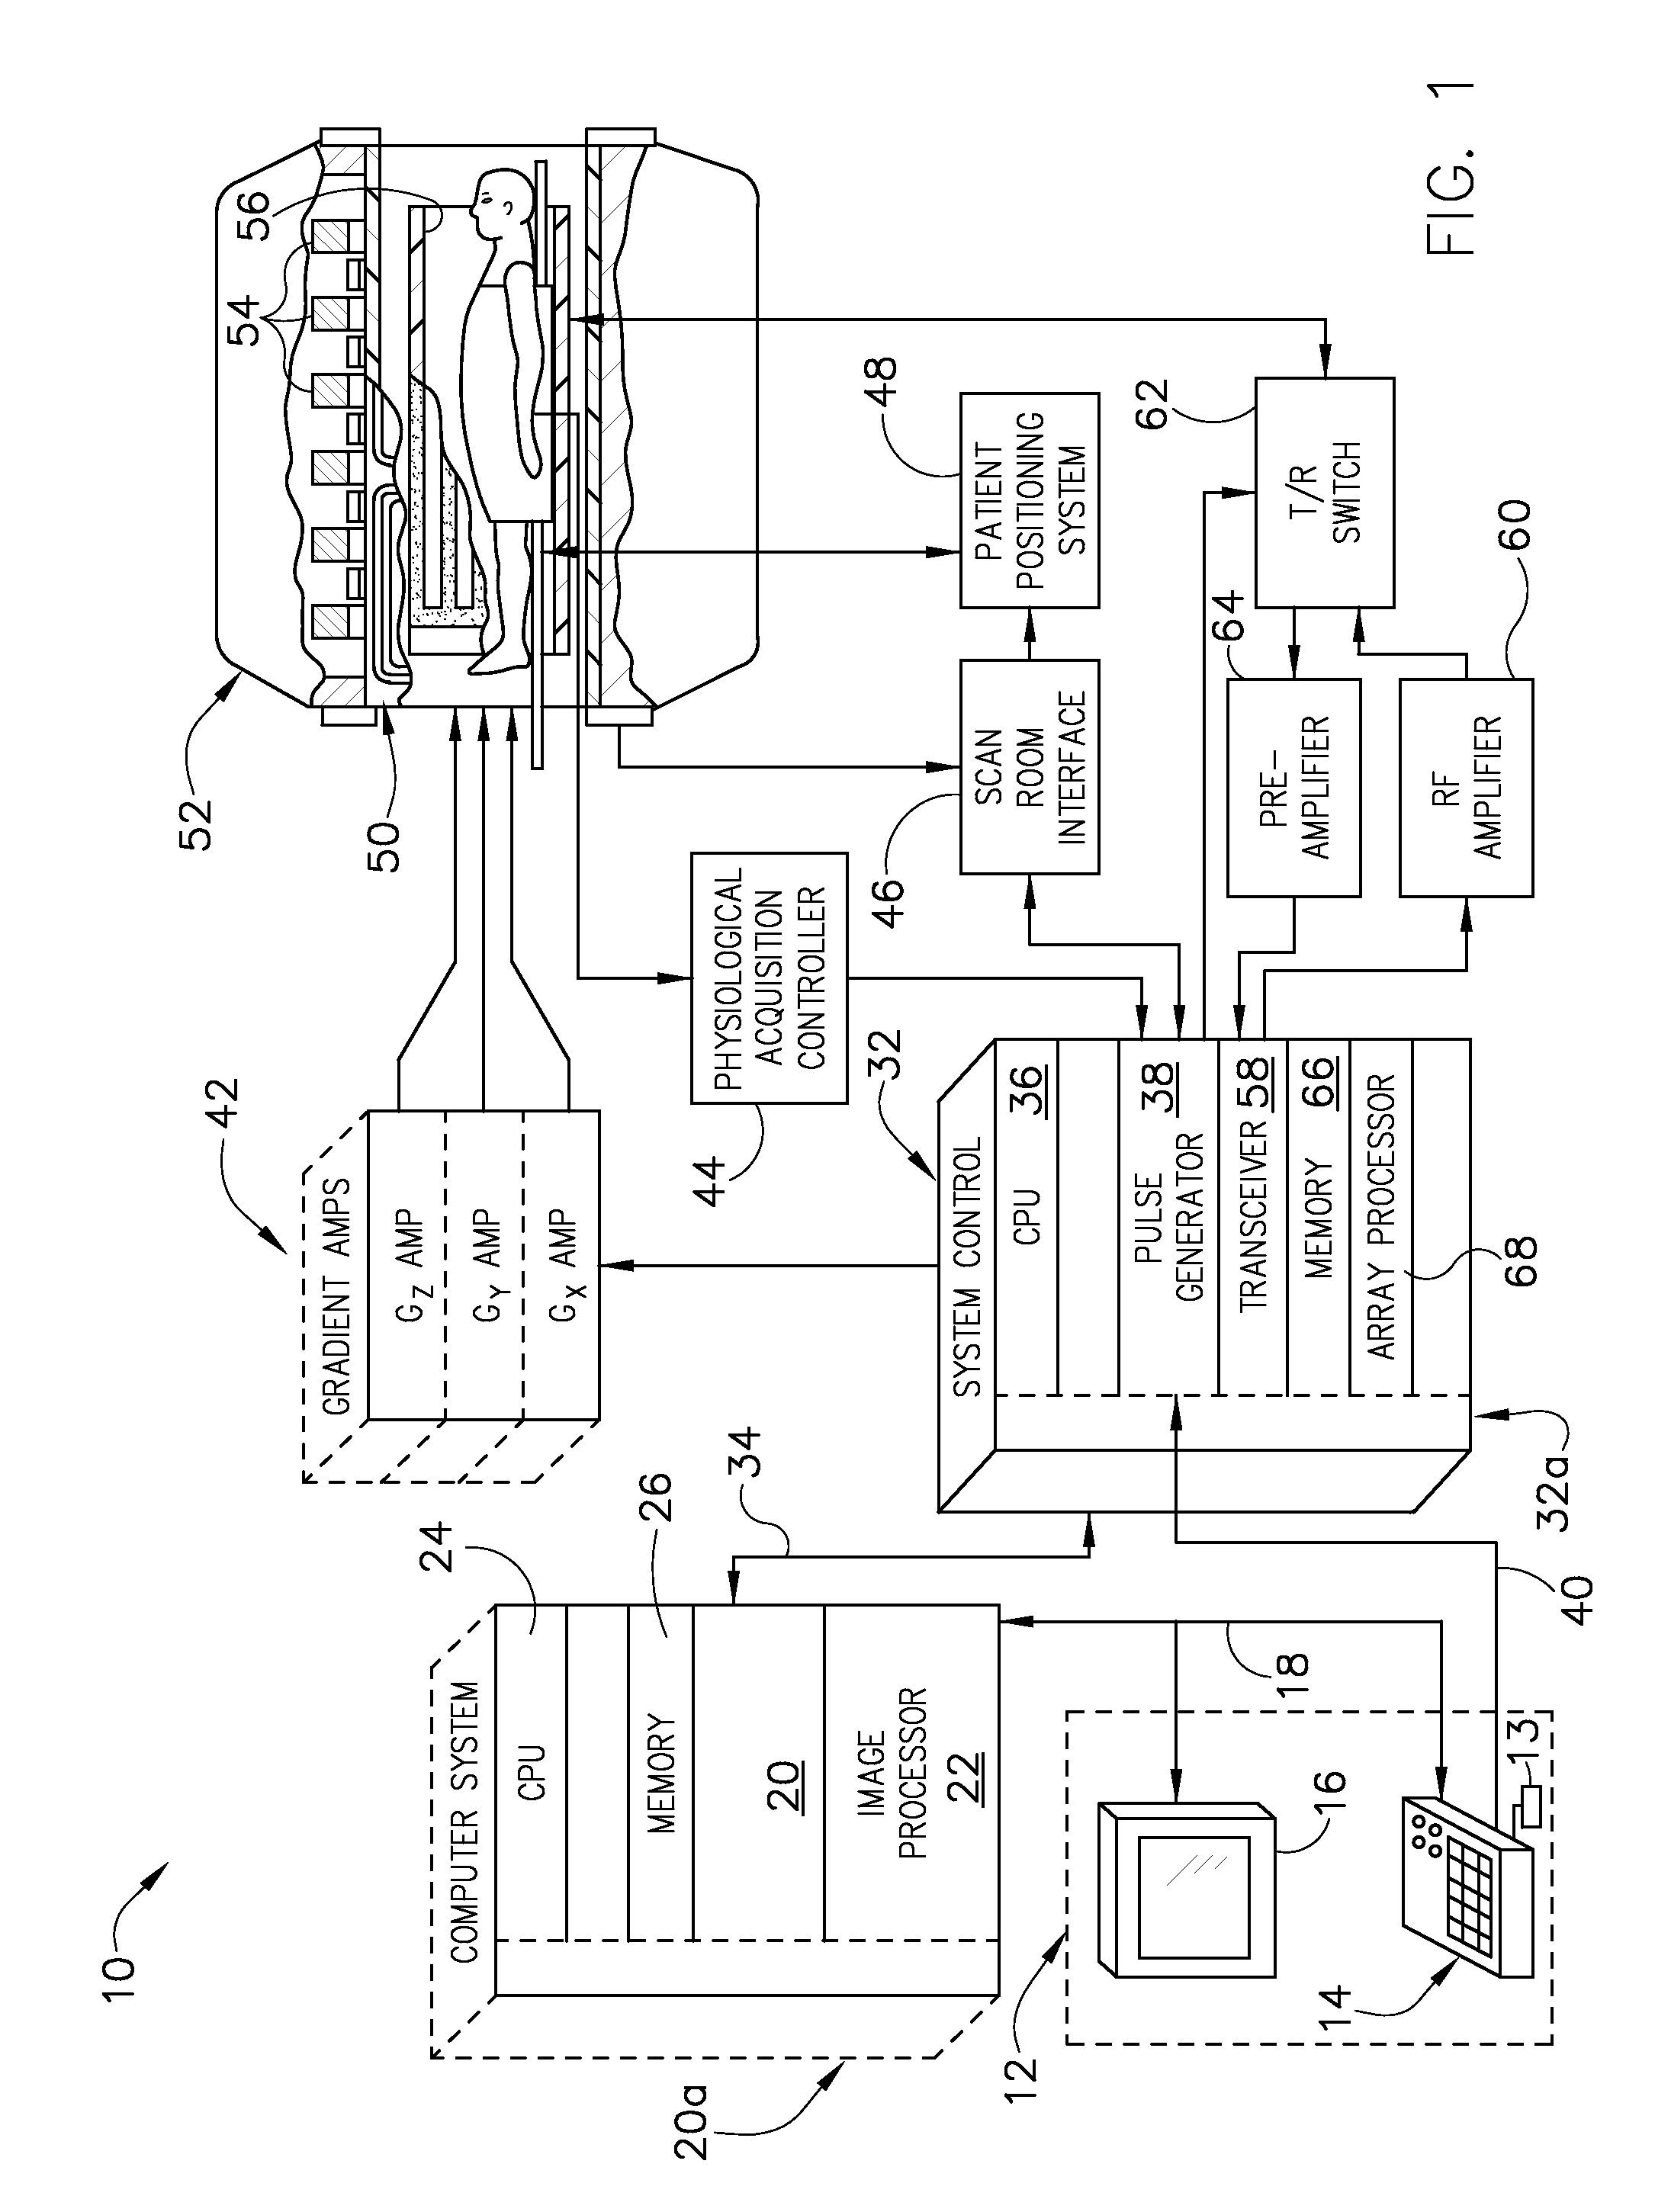 System and method for using parallel imaging with compressed sensing